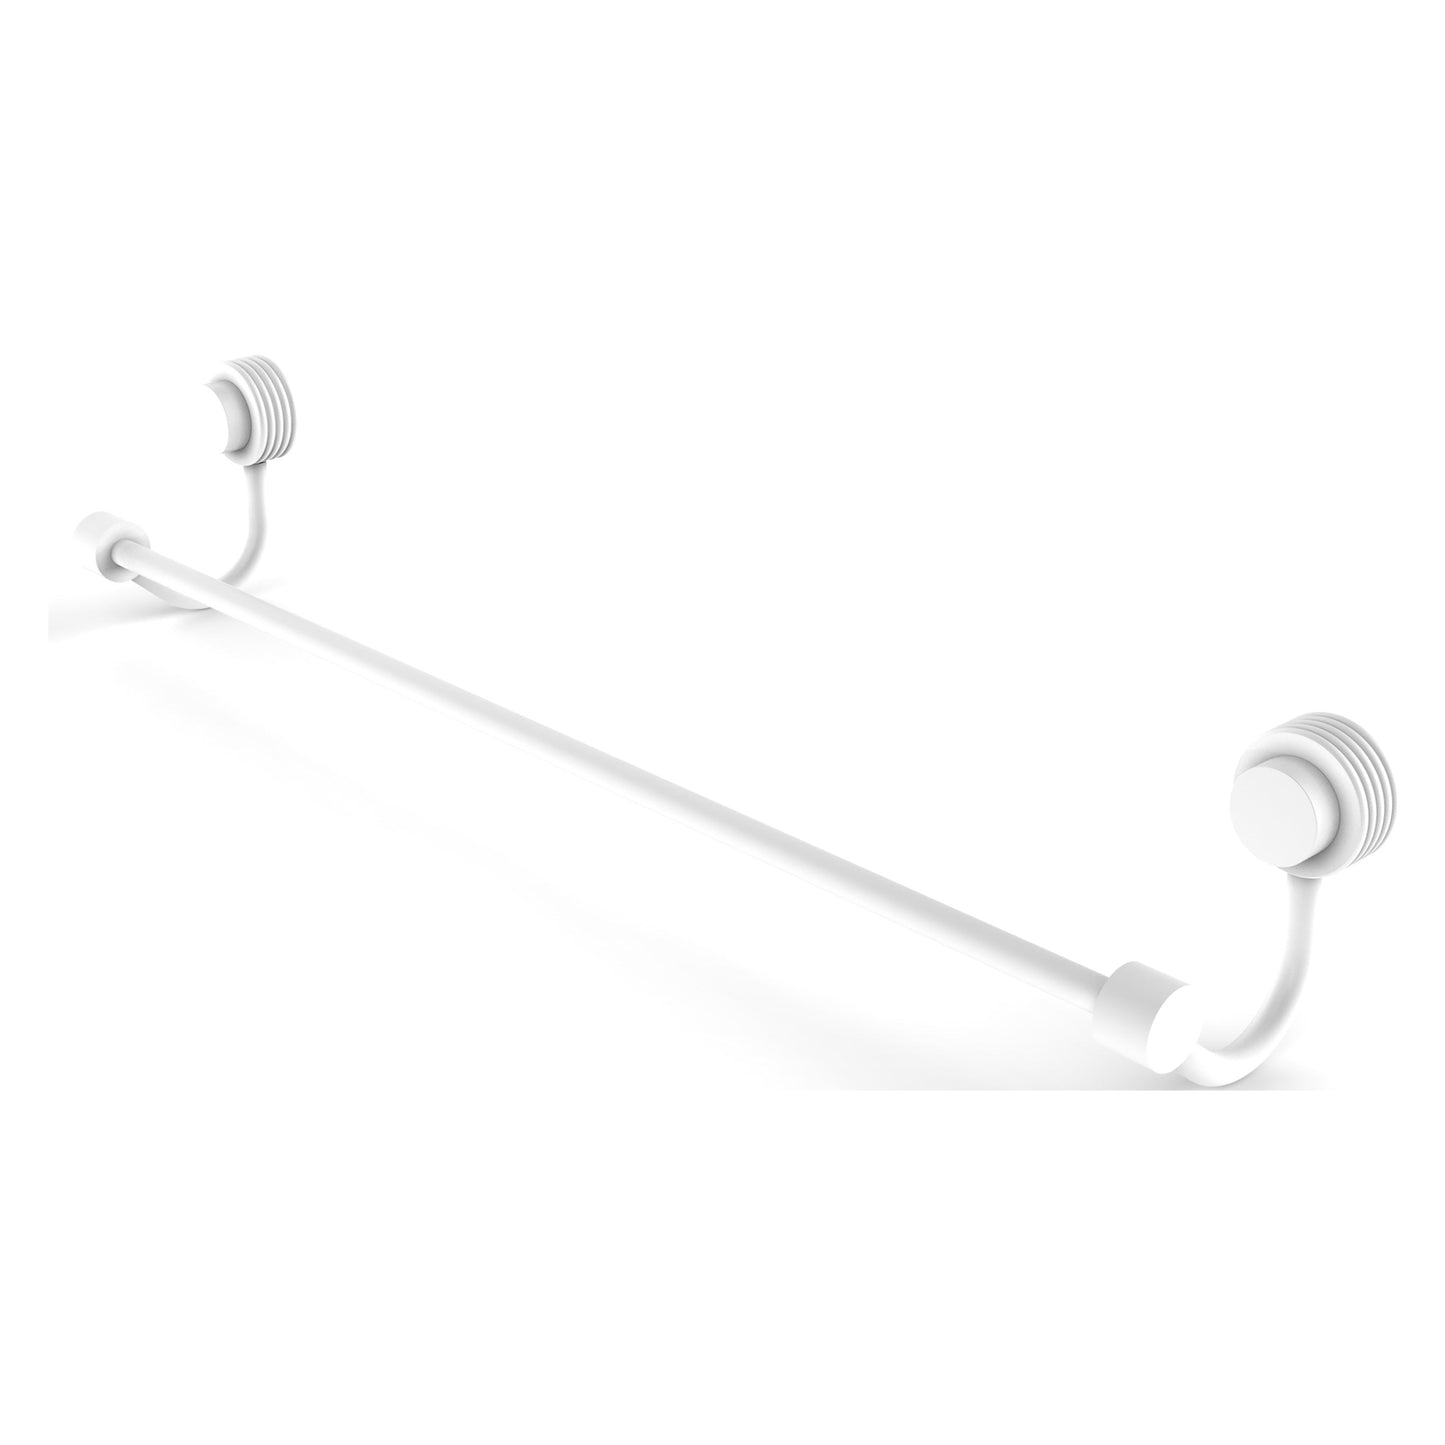 Allied Brass Venus 18" x 19" Matte White Solid Brass Towel Bar With Grooved Accent